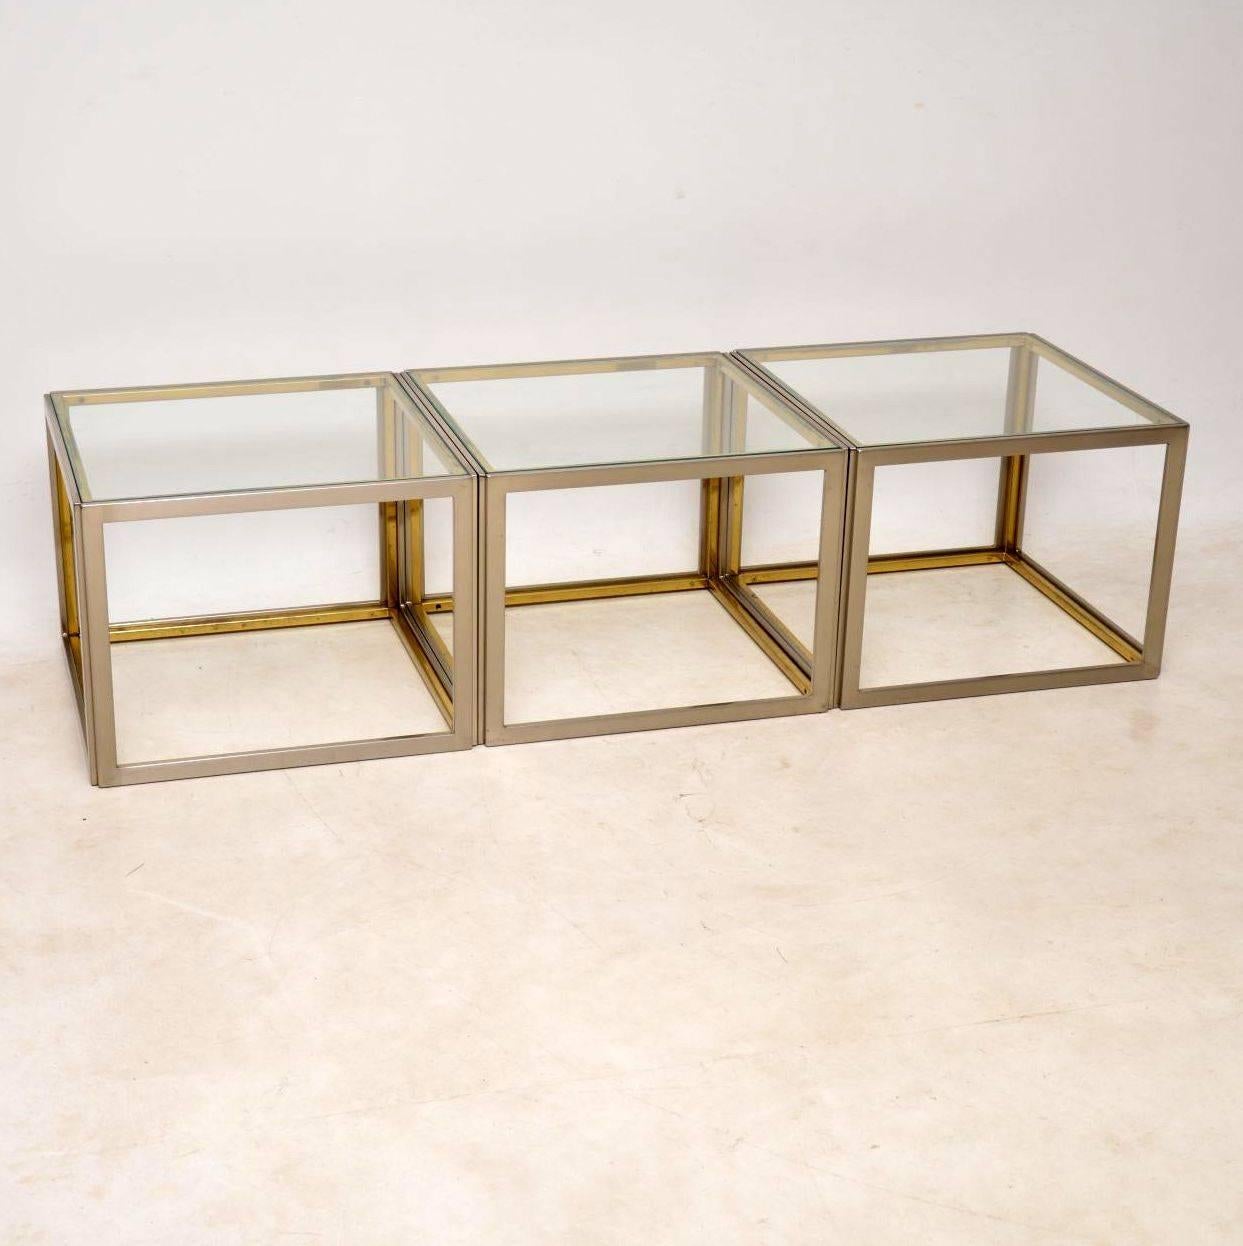 A very stylish and extremely well made set of vintage tables in brushed steel and brass, with clear glass tops. These were made in Italy and they date from around the 1970s. The quality is superb and the condition is excellent for their age, with